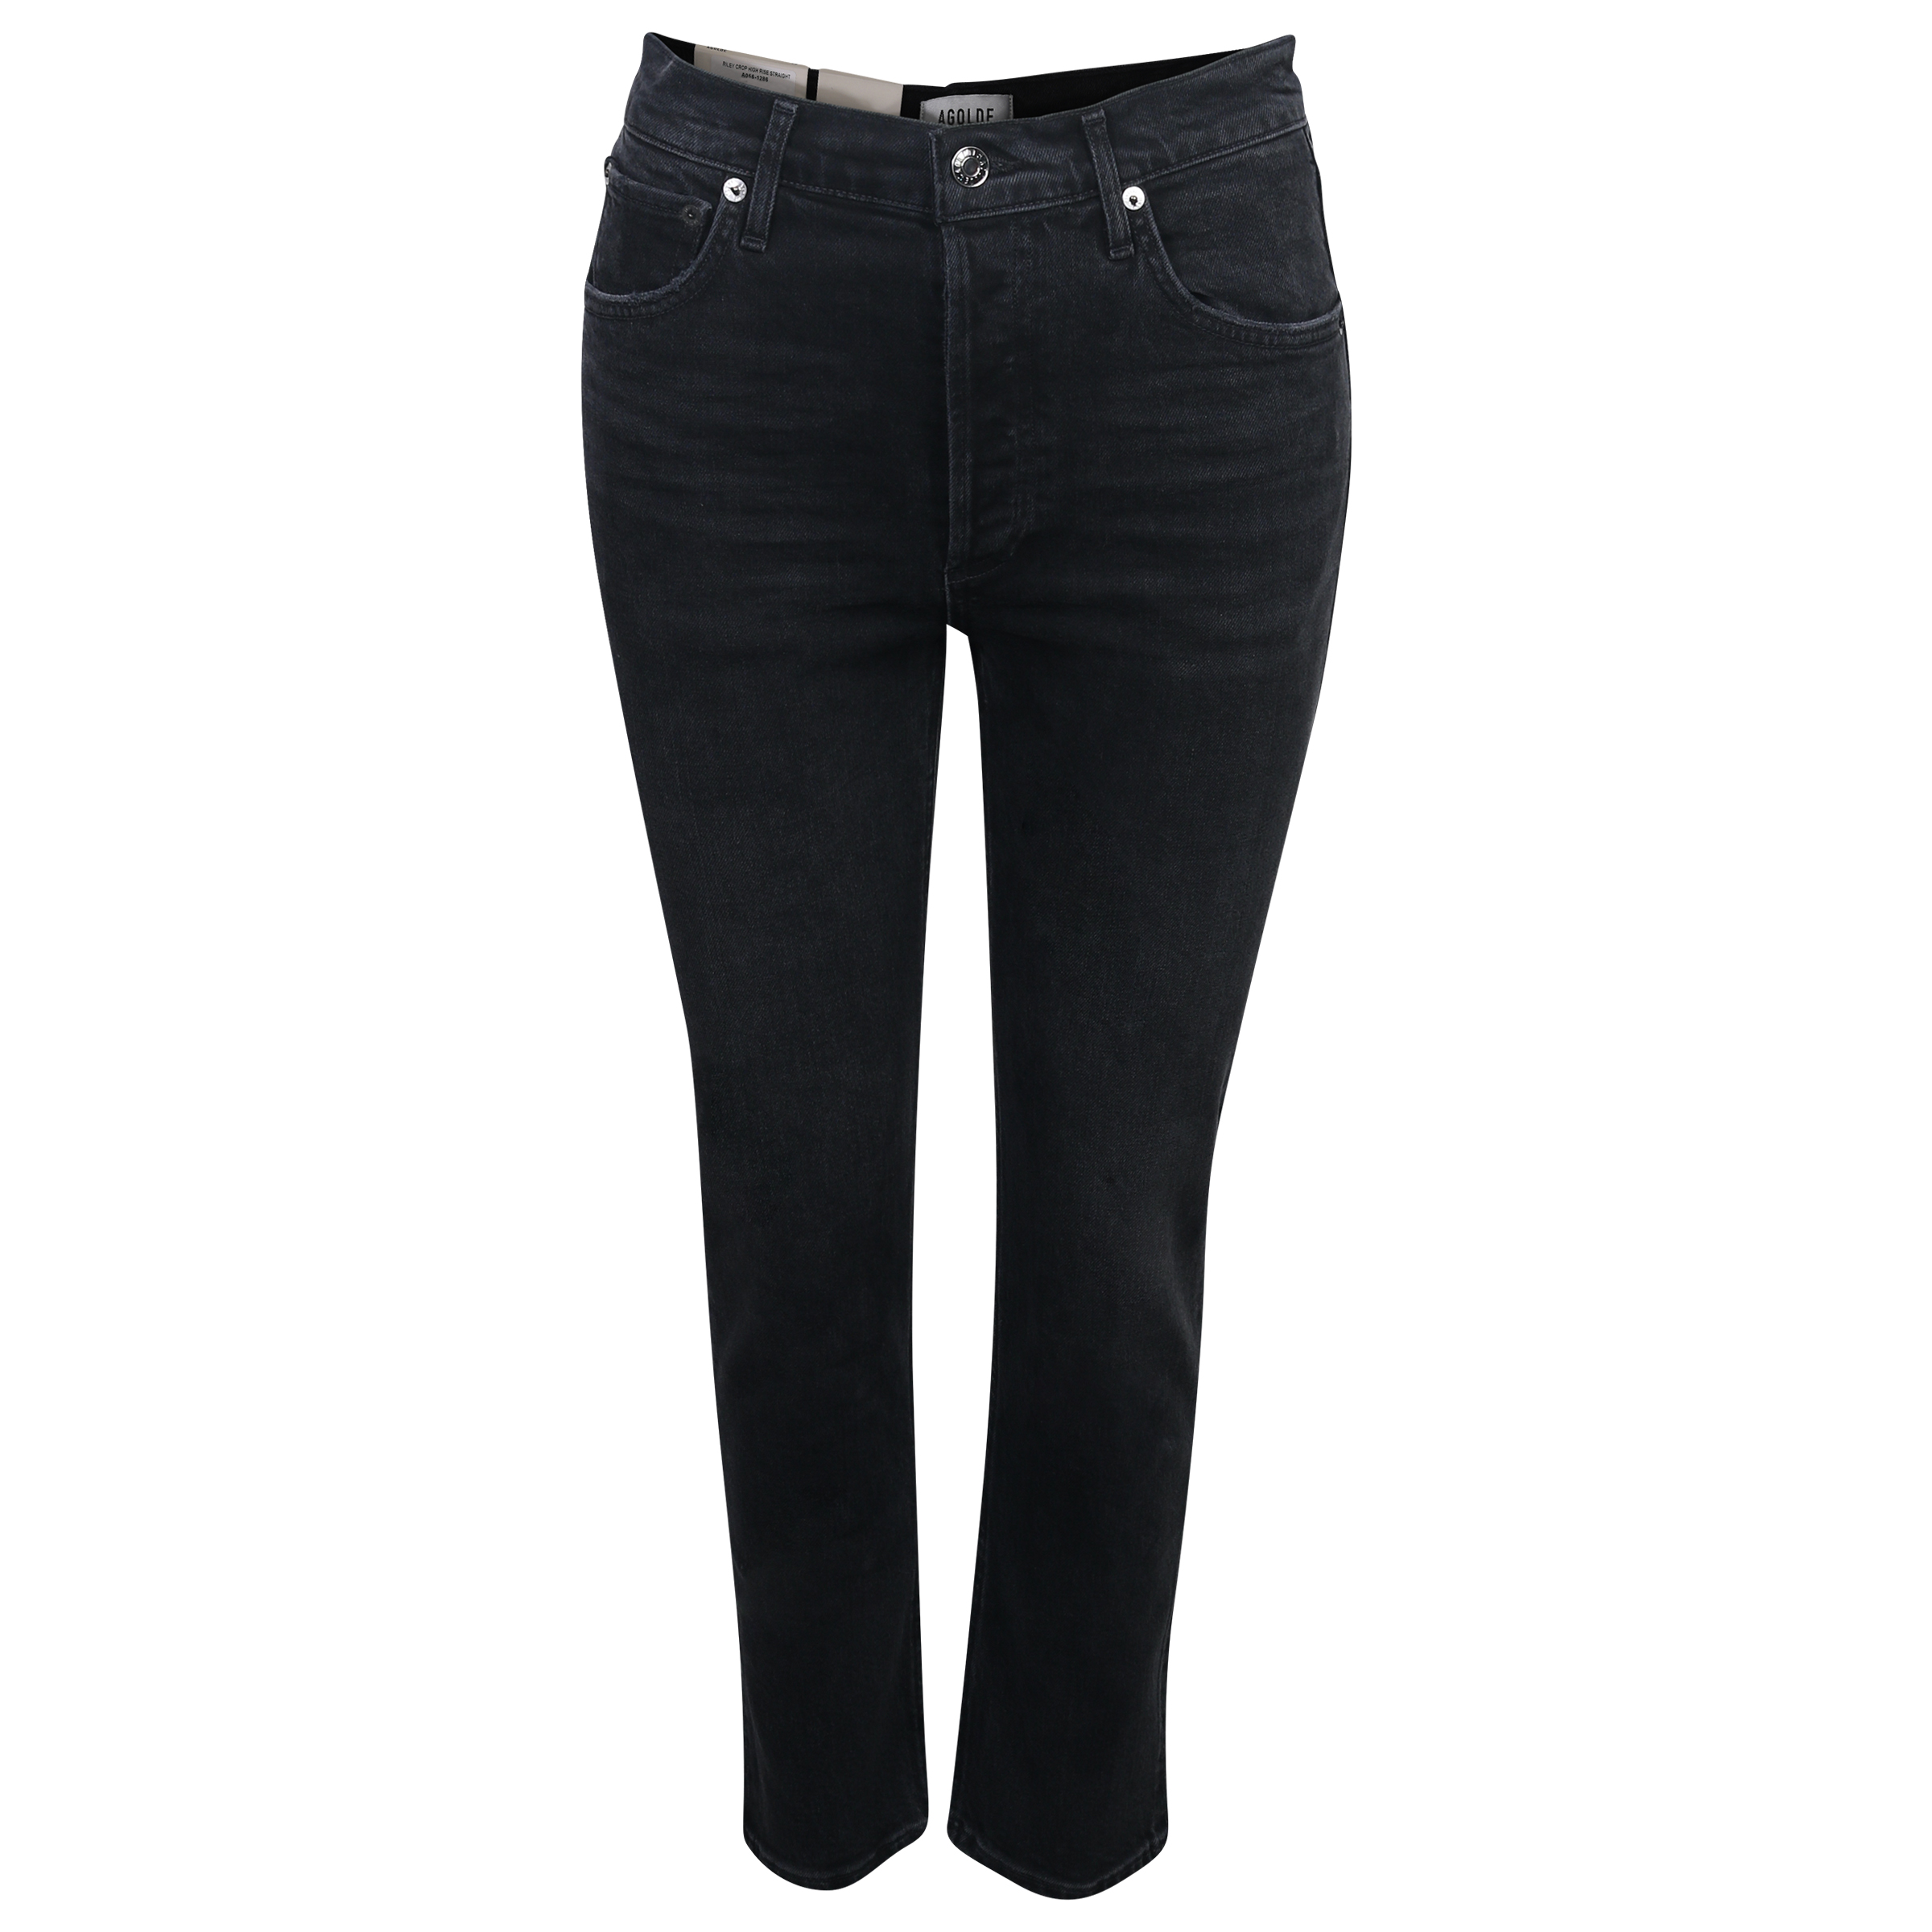 Agolde Jeans Riley in Panoramic Black Washed